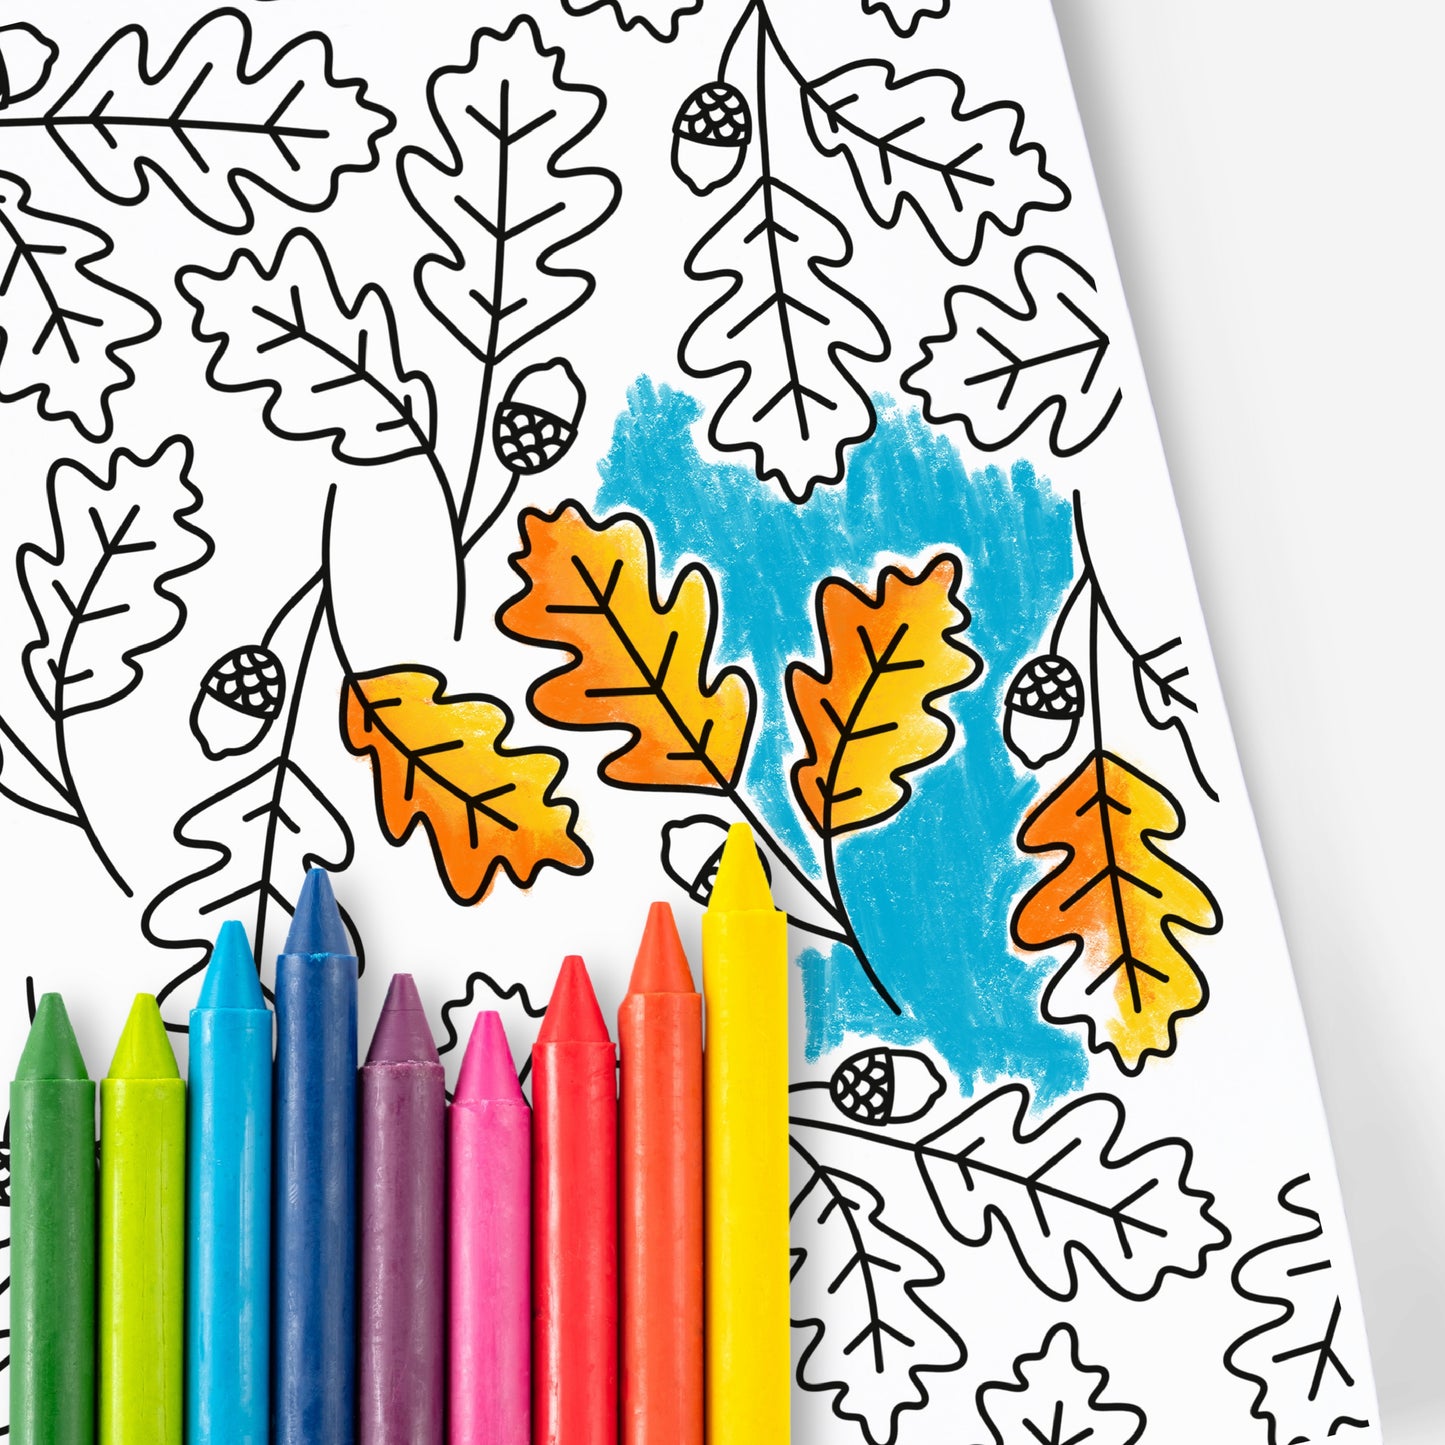 50 Coloring Pages | All The Seasons Digital Coloring Book Illustrations | Mindful Printable Coloring Sheets | Calming Seasonal Doodles